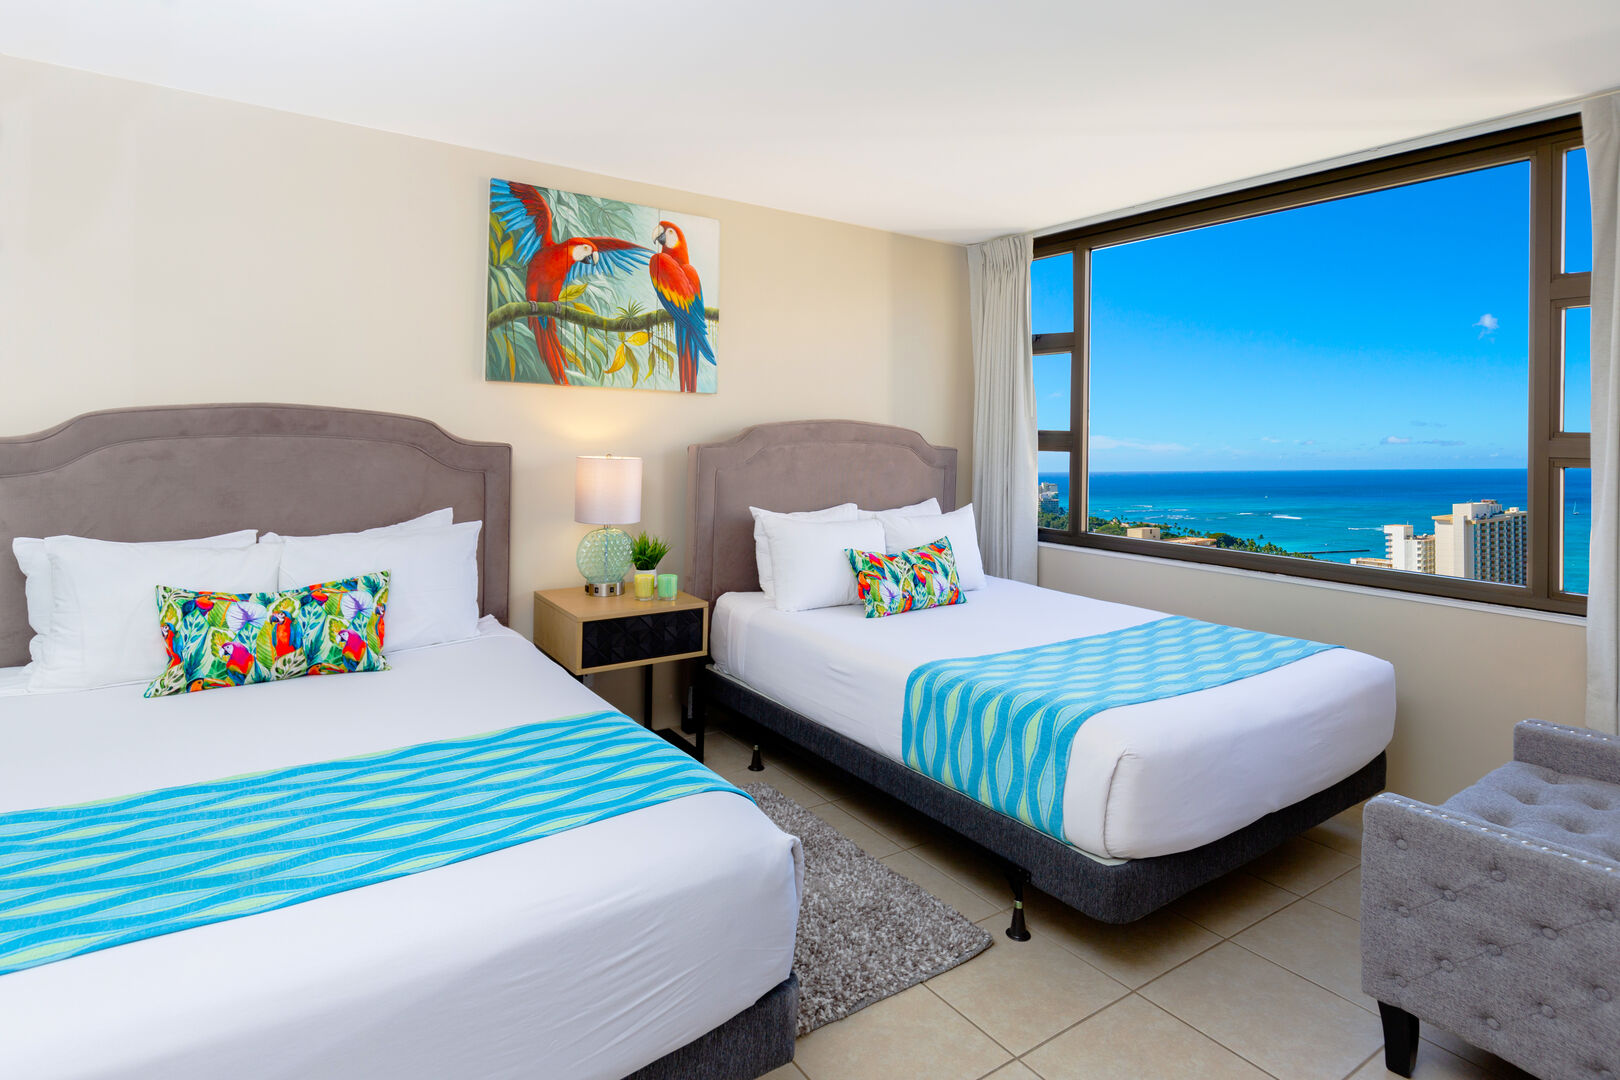 Bedroom with 2 queen size beds and ocean view